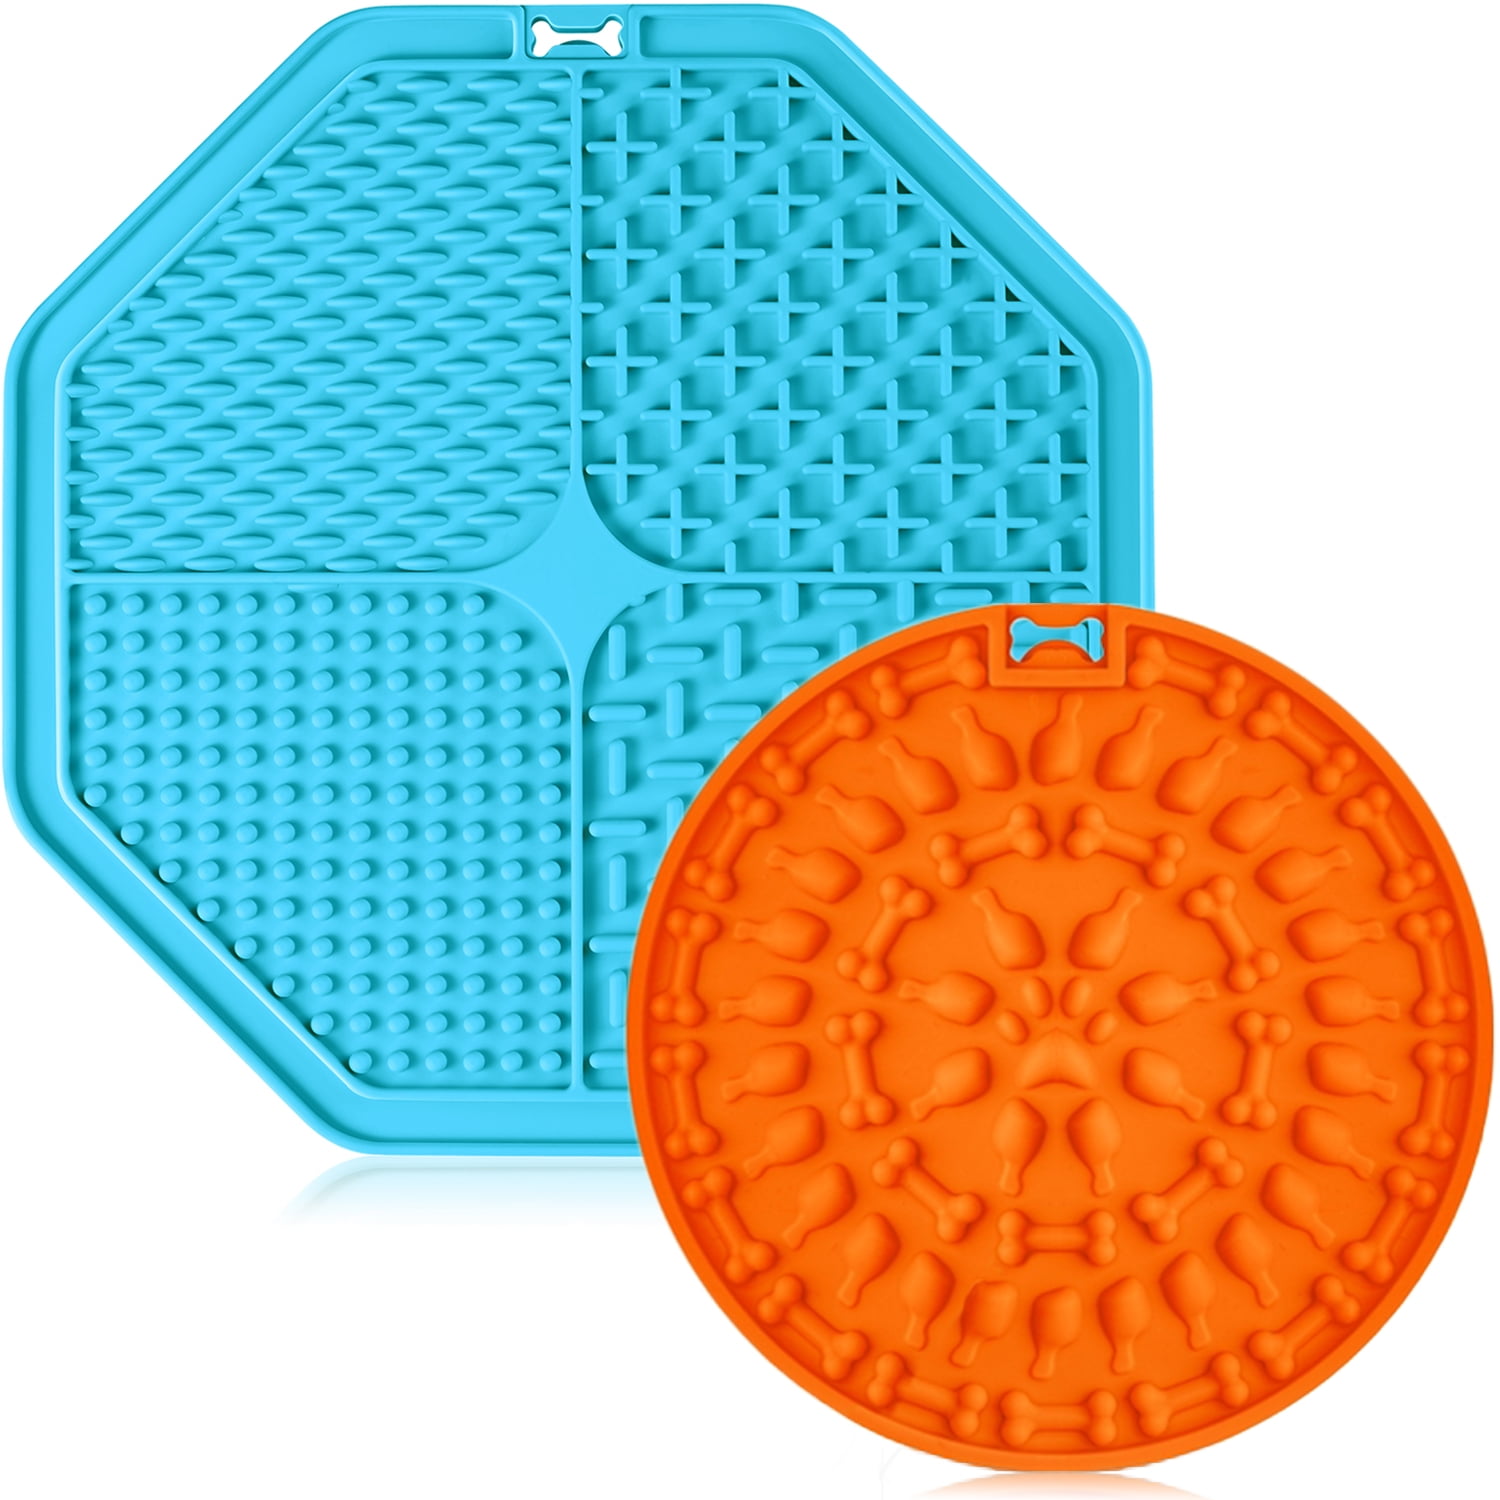 Dog Licking Mat for Anxiety Peanut Butter Slow Feeder Dog Bowls Dog Licking  Pad with Strong Suction to Wall for Pet Bathing,Grooming,and Dog Training